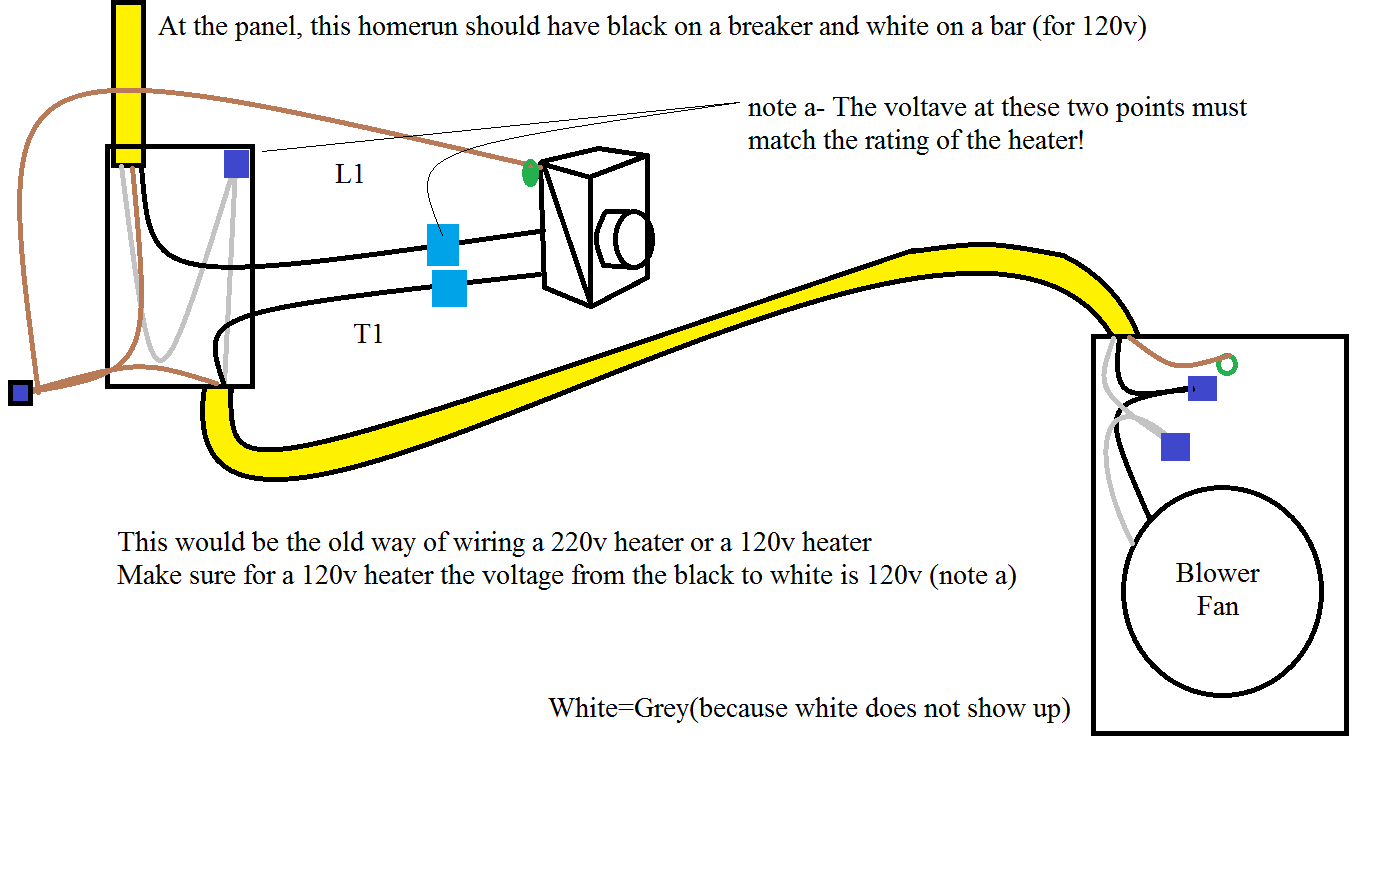 Heating Thermostat Wiring Diagram from 3.bp.blogspot.com